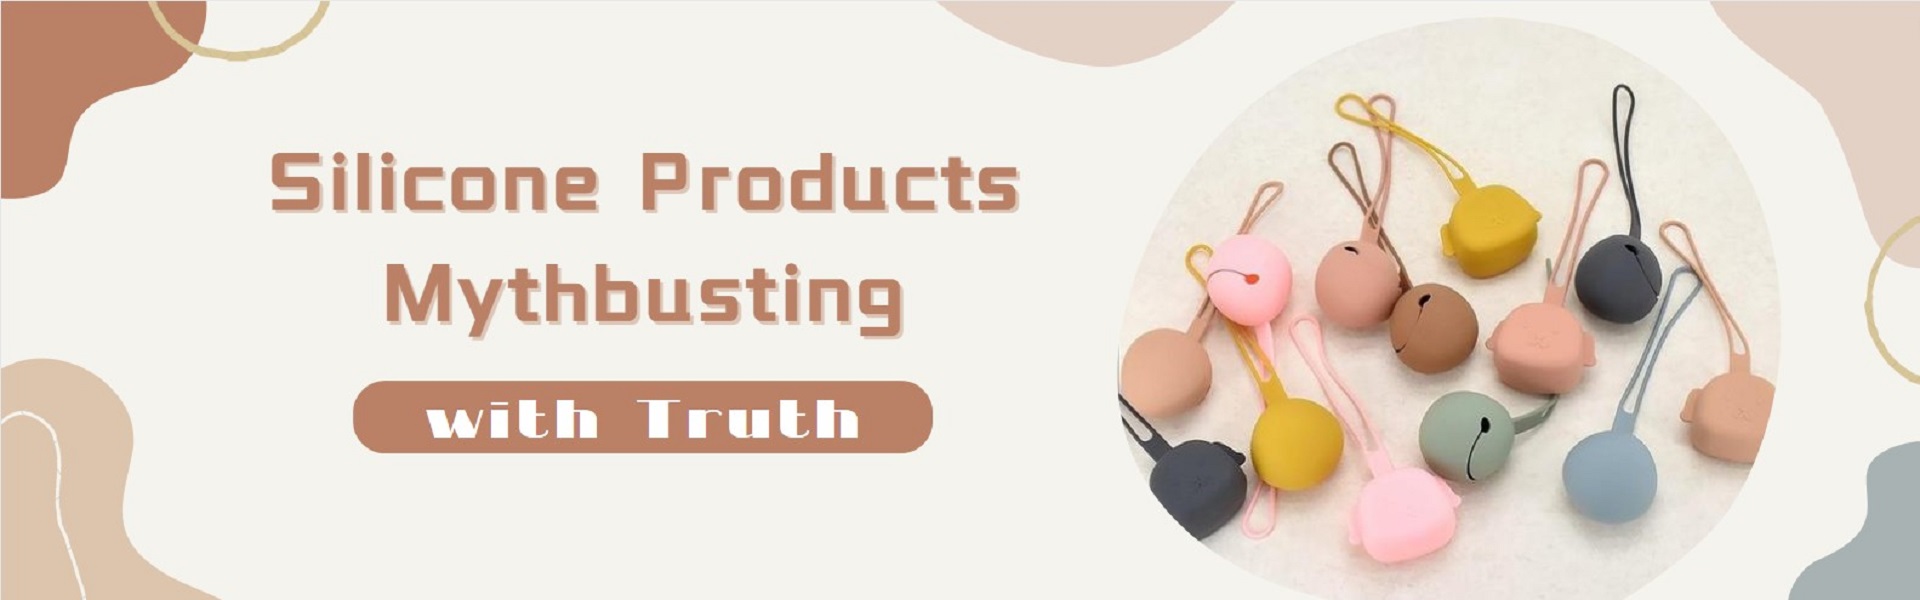 Silicone Products Mythbusting (with Truth)